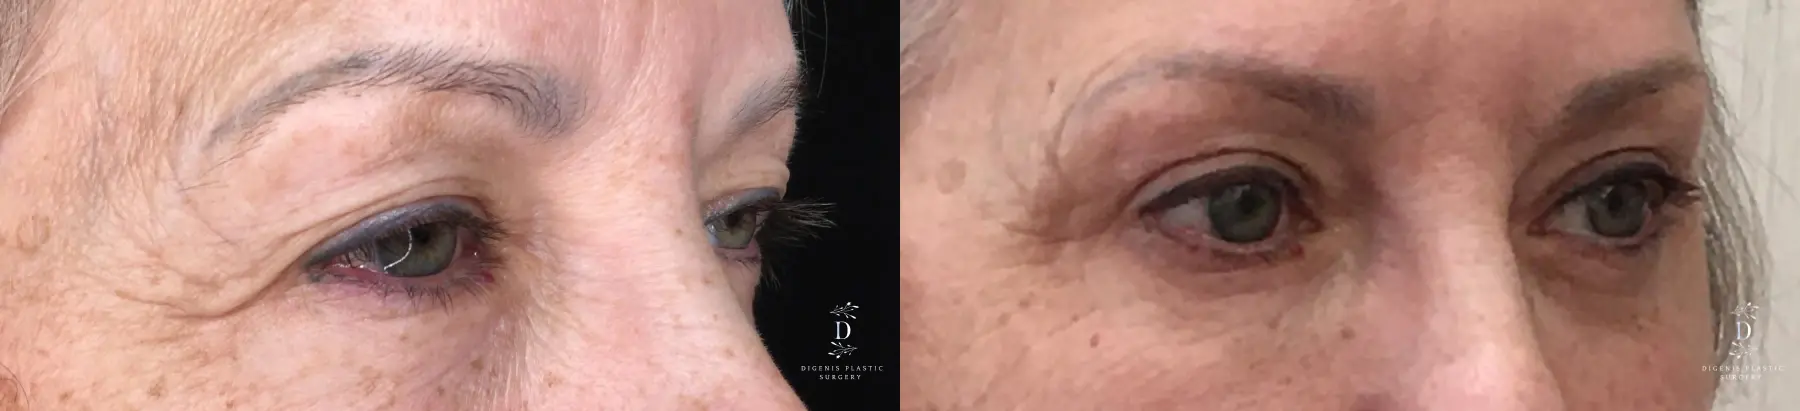 Eyelid Surgery: Patient 29 - Before and After 2